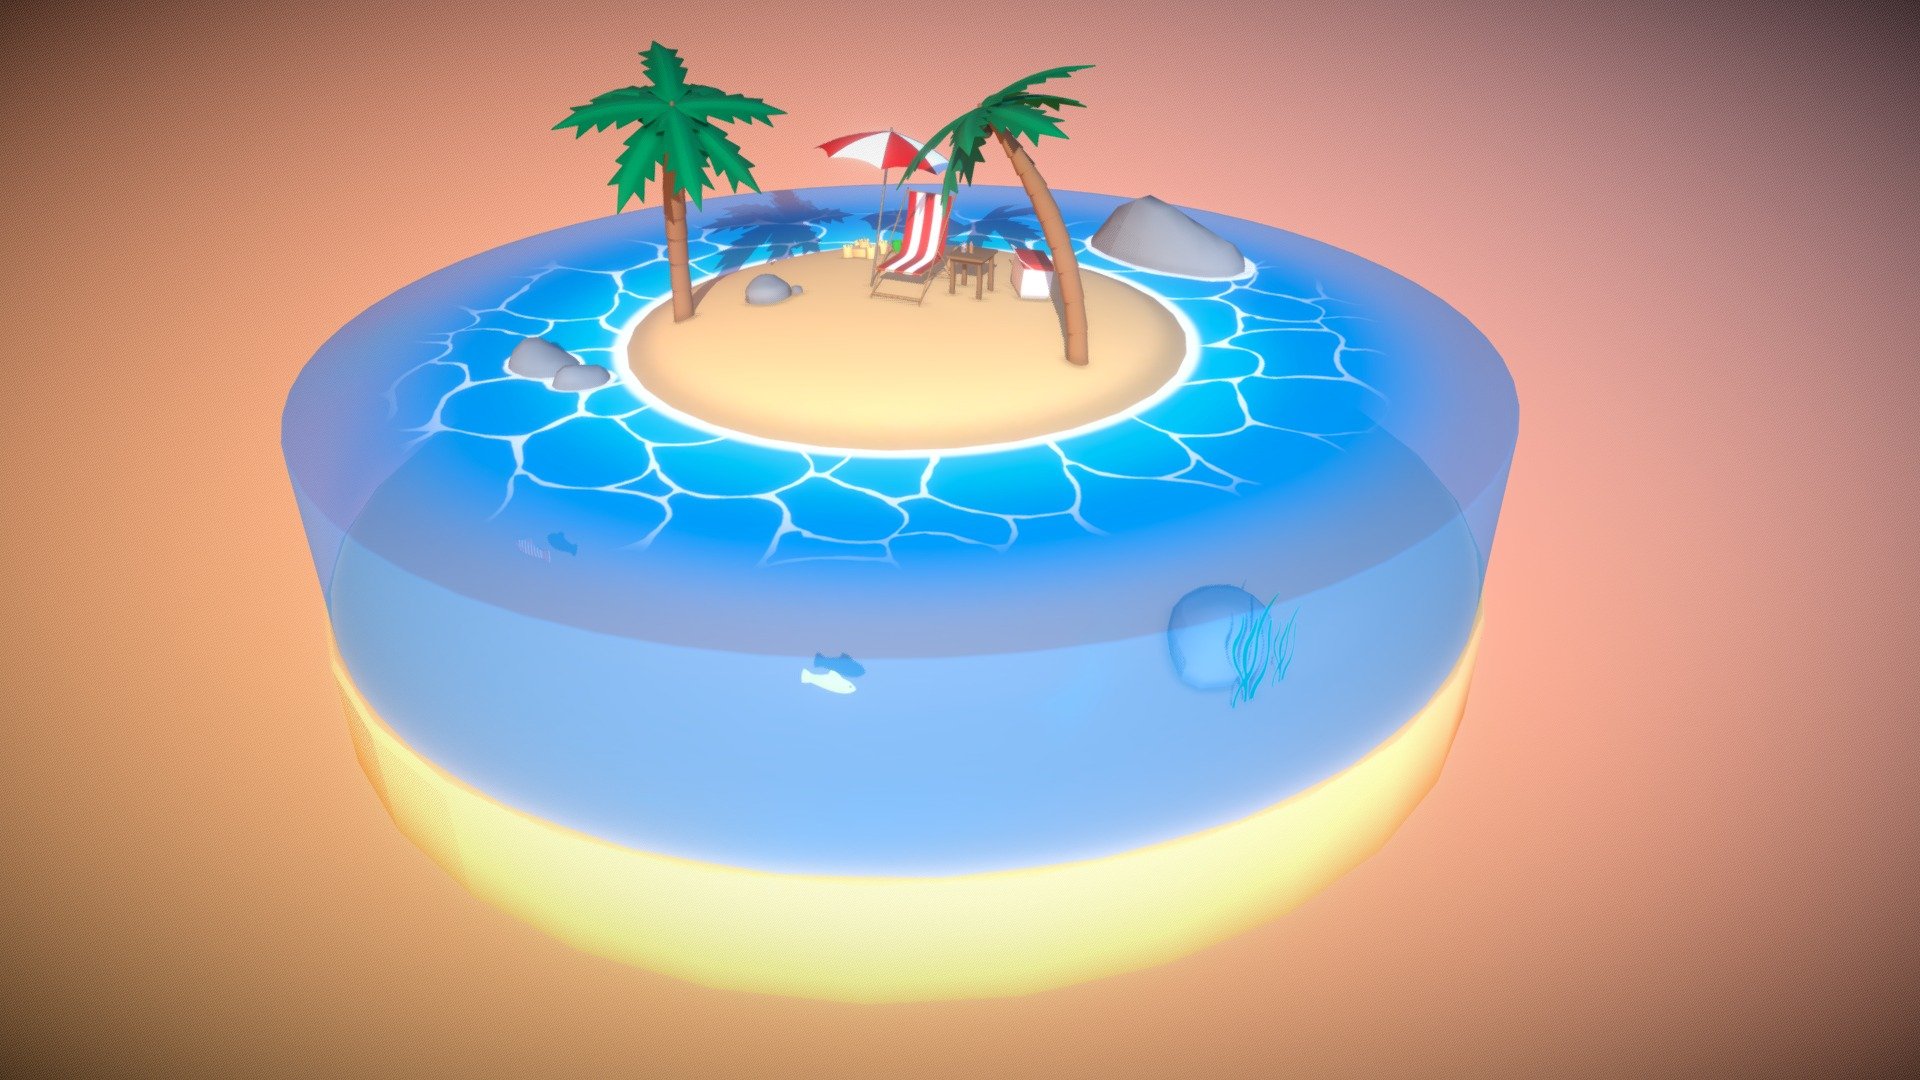 Relaxing island where to be in peace with the world - Lost & In Peace - 3D model by Urtzi 3d model